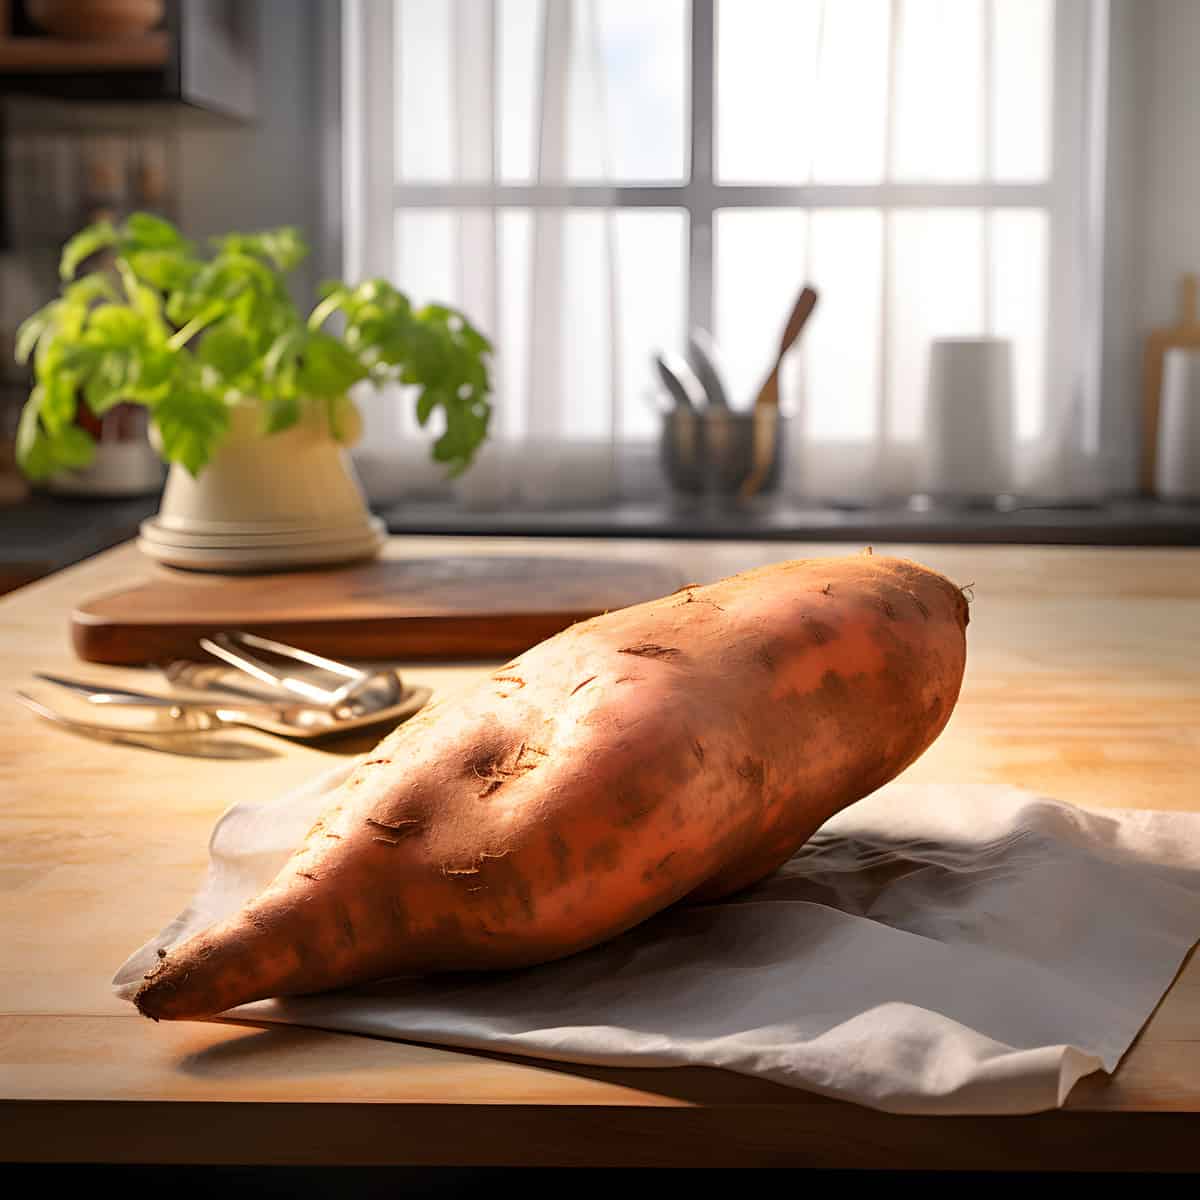 Onolena Or Hes Number Sweet Potatoes on a kitchen counter